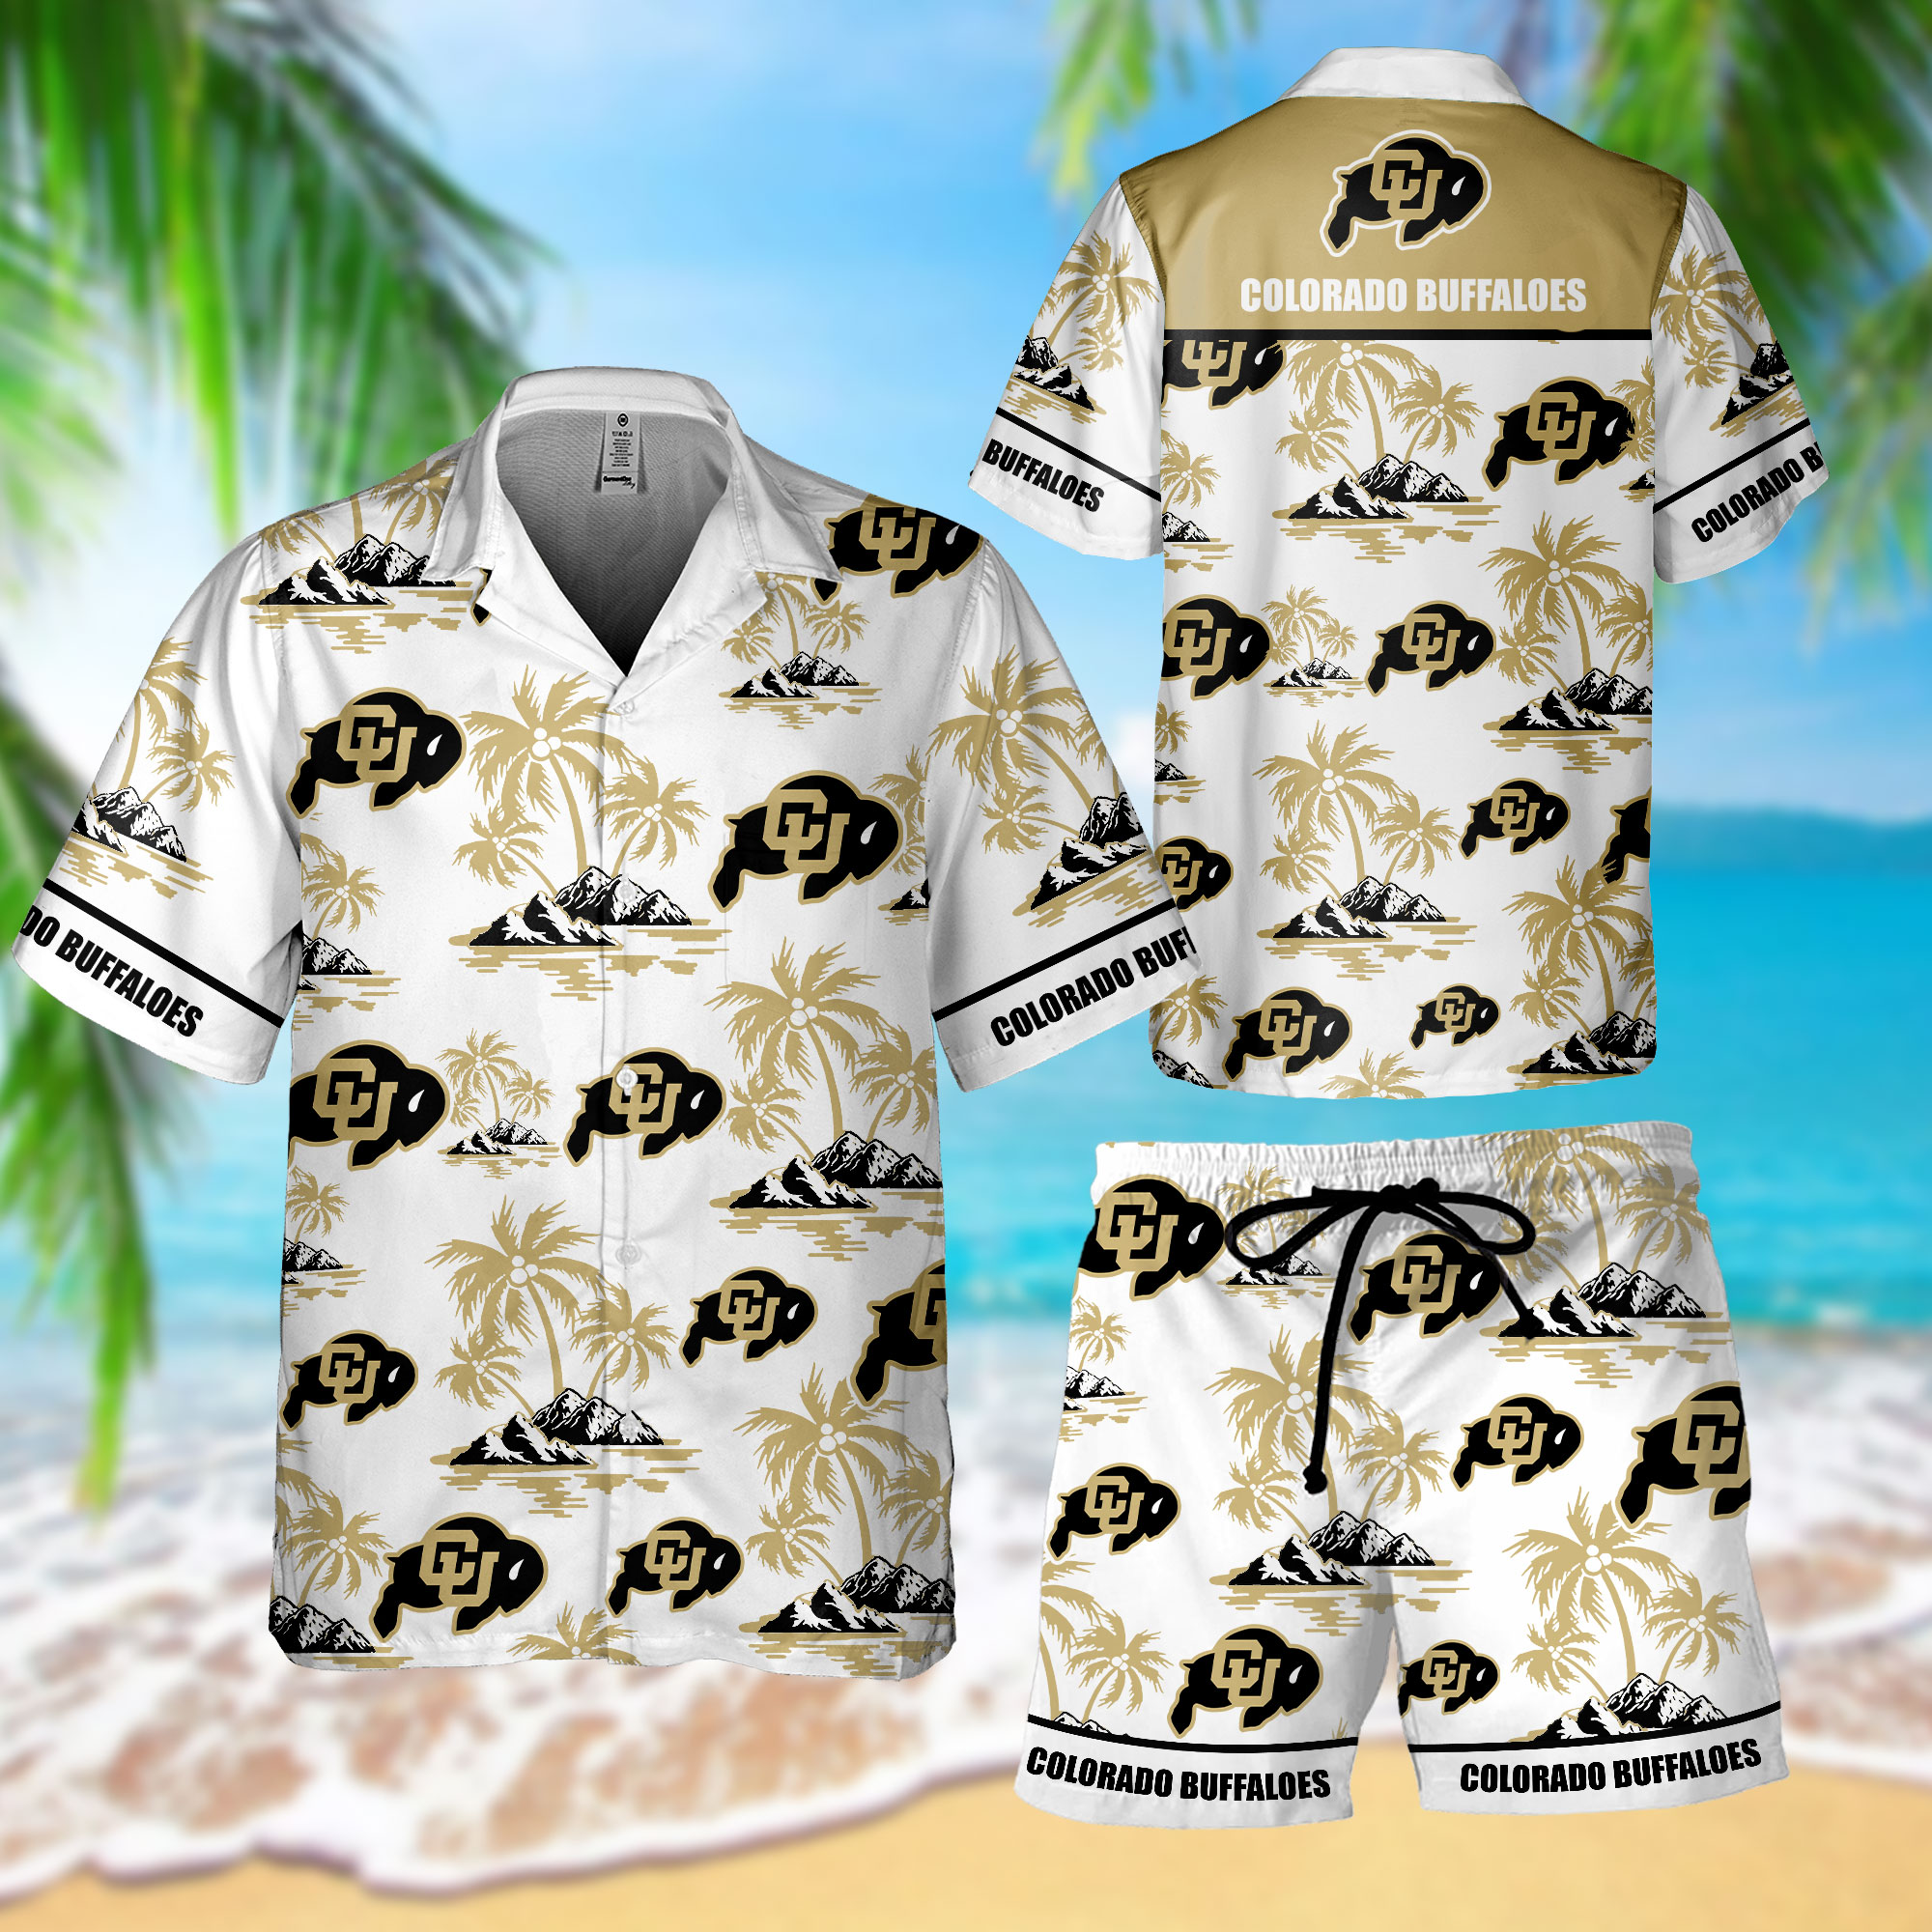 Let me show you about some combo hawaiian shirt so cool in this weather 25